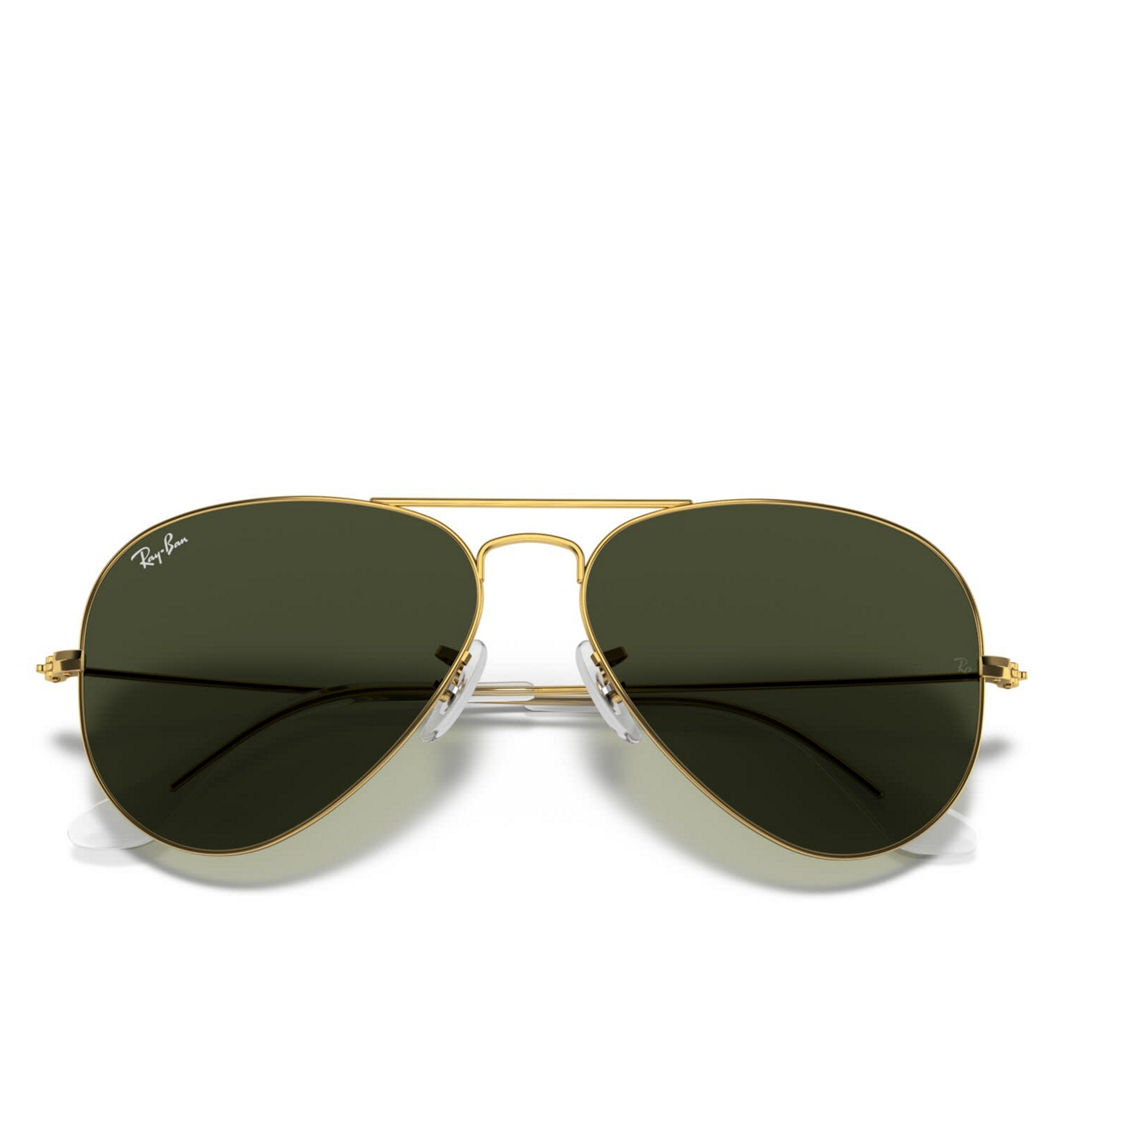 Ray-Ban RB3025 Aviator Classic - Image 5 of 5